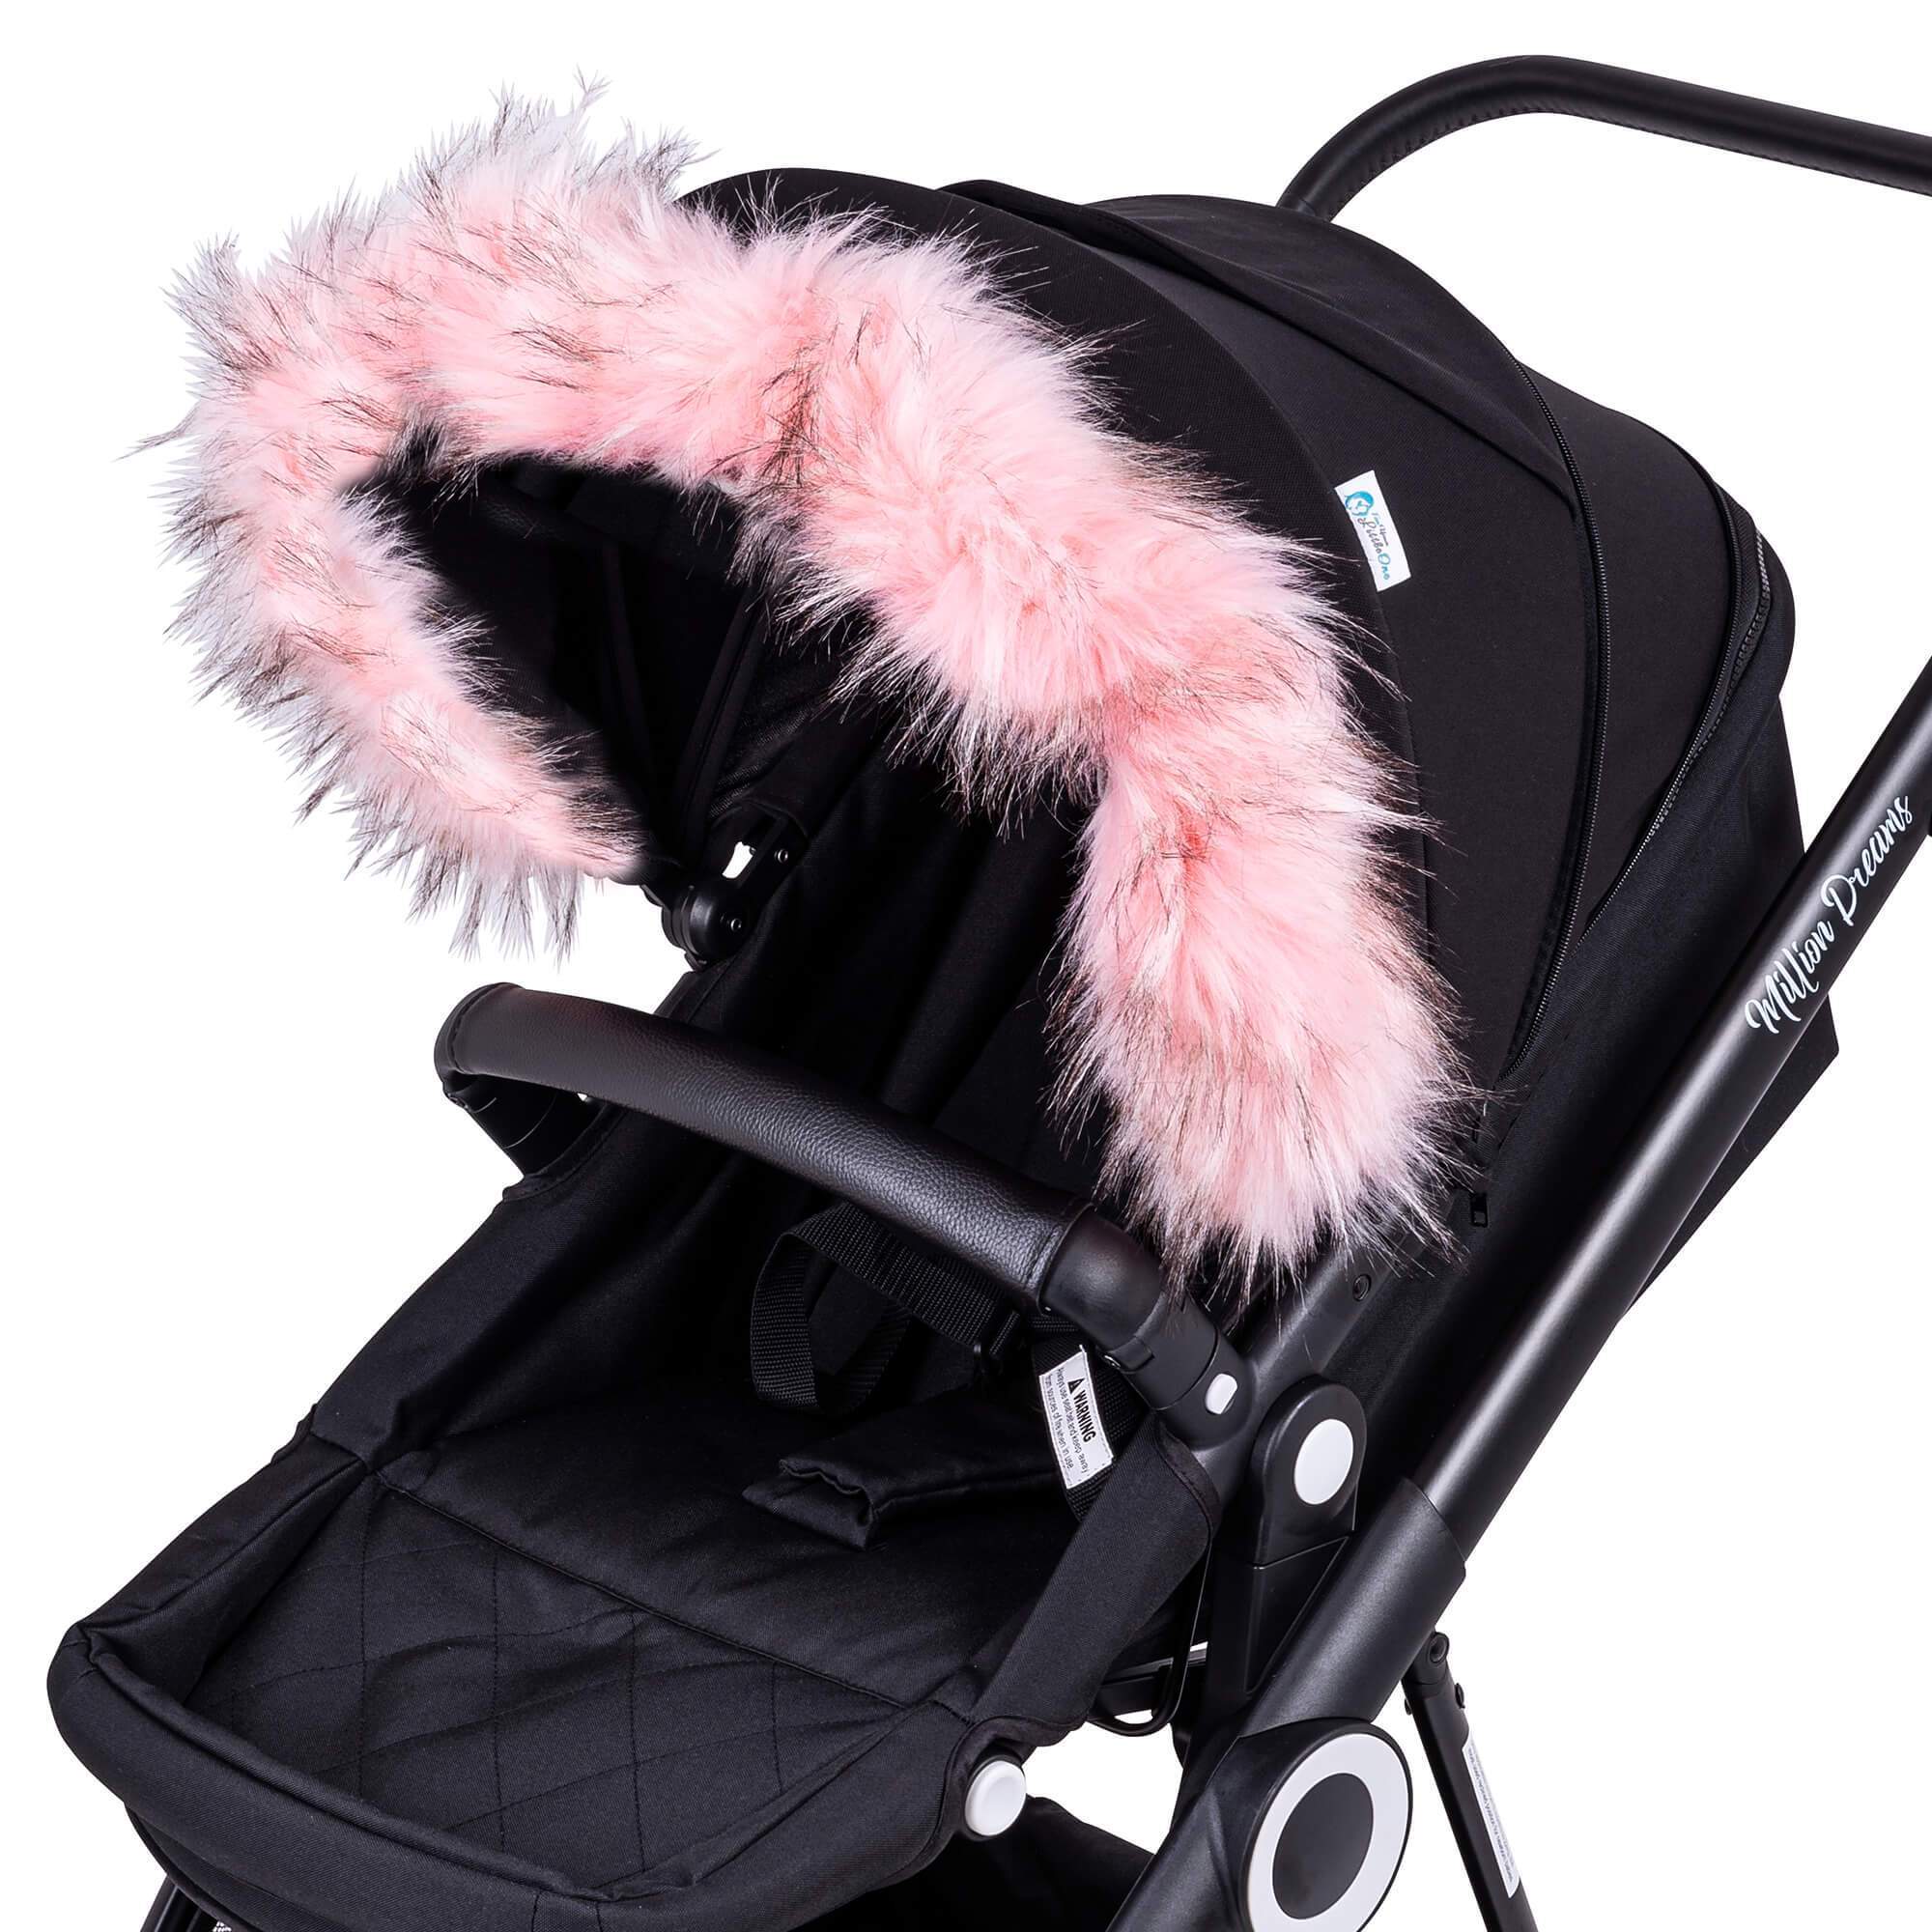 Pram Fur Hood Trim Attachment For Pushchair Compatible with Kiddy - For Your Little One